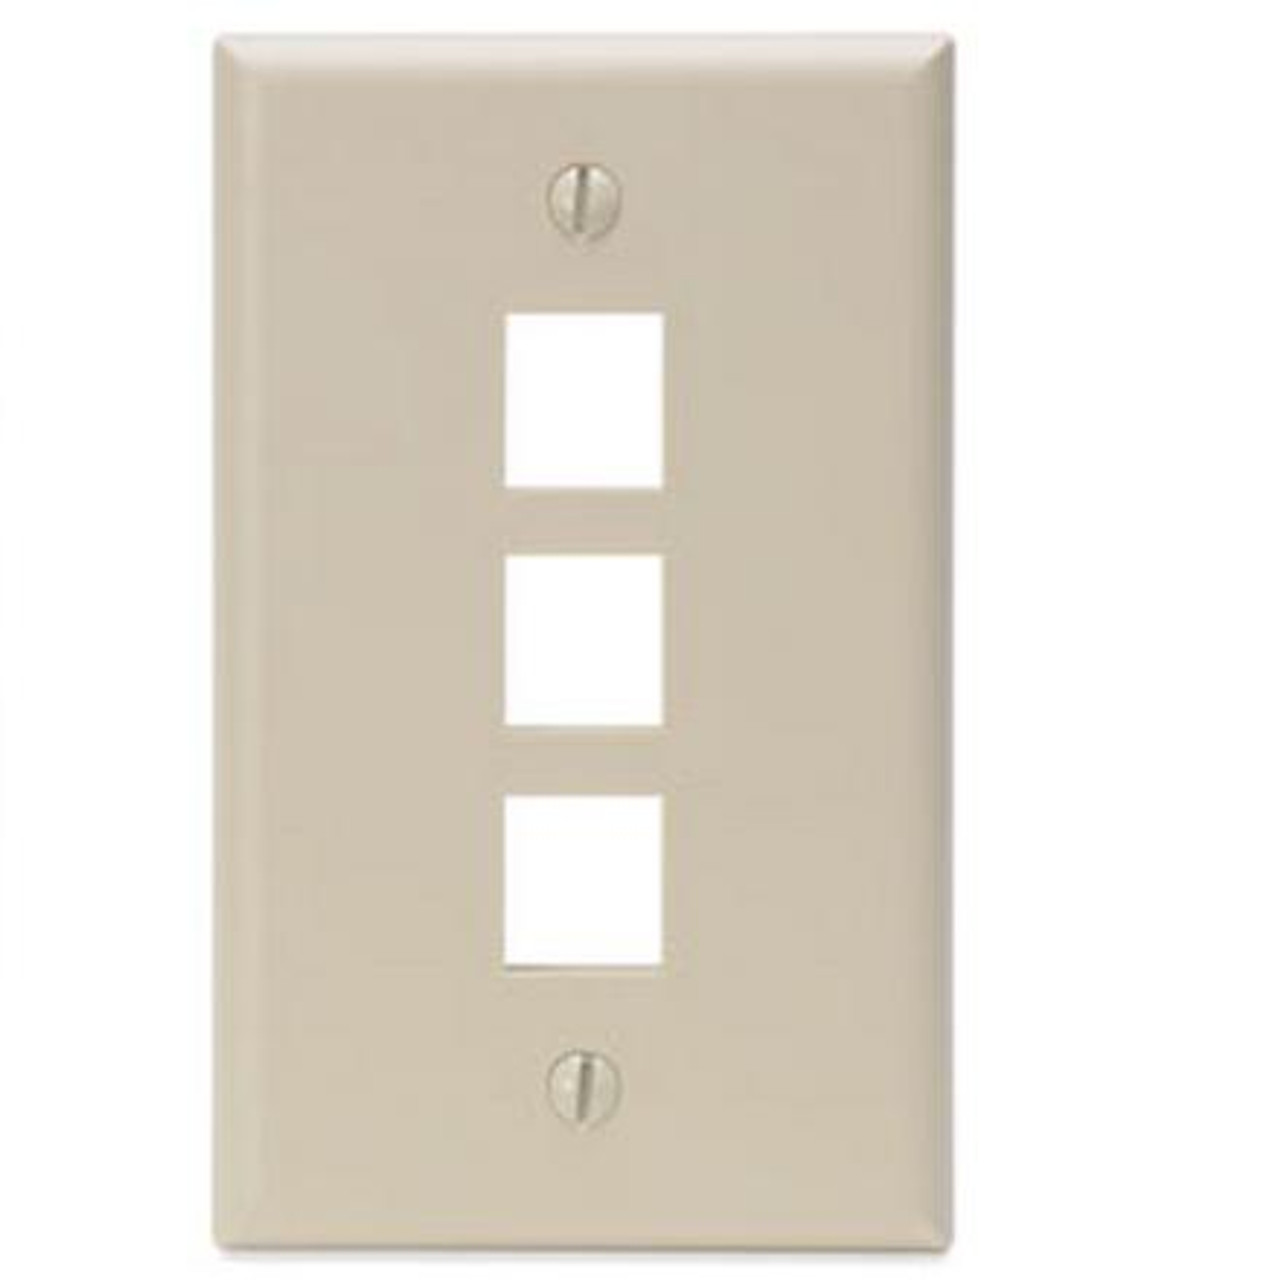 Face Plate 3-Port Ivory Quickport, Leviton